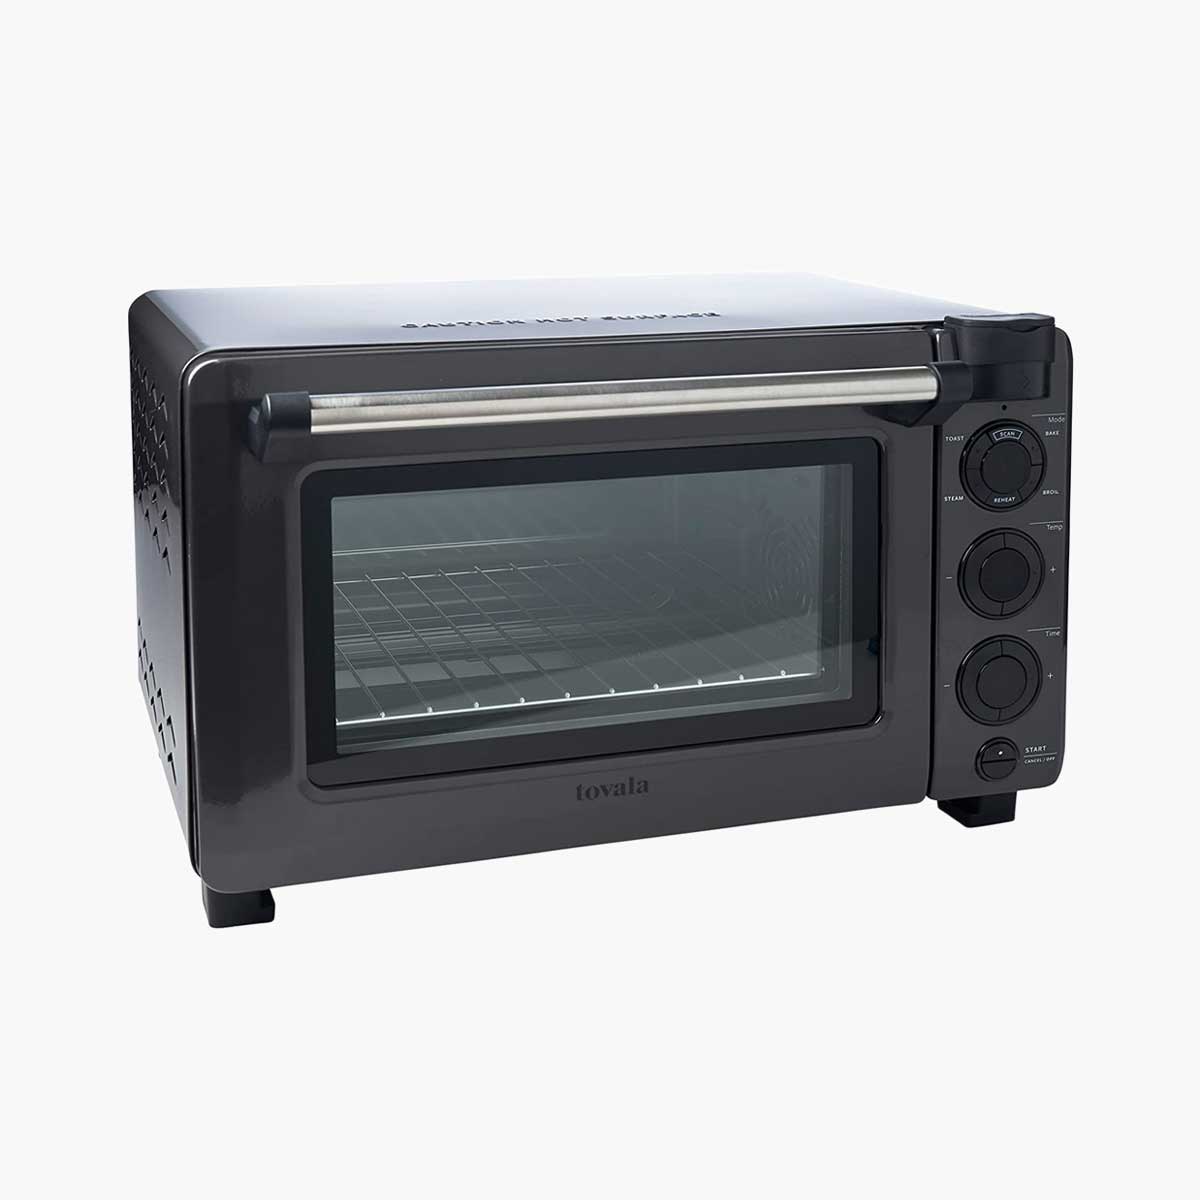 A Tovola smart oven, one of Oprah's 12 favorite kitchen gifts for 2021.